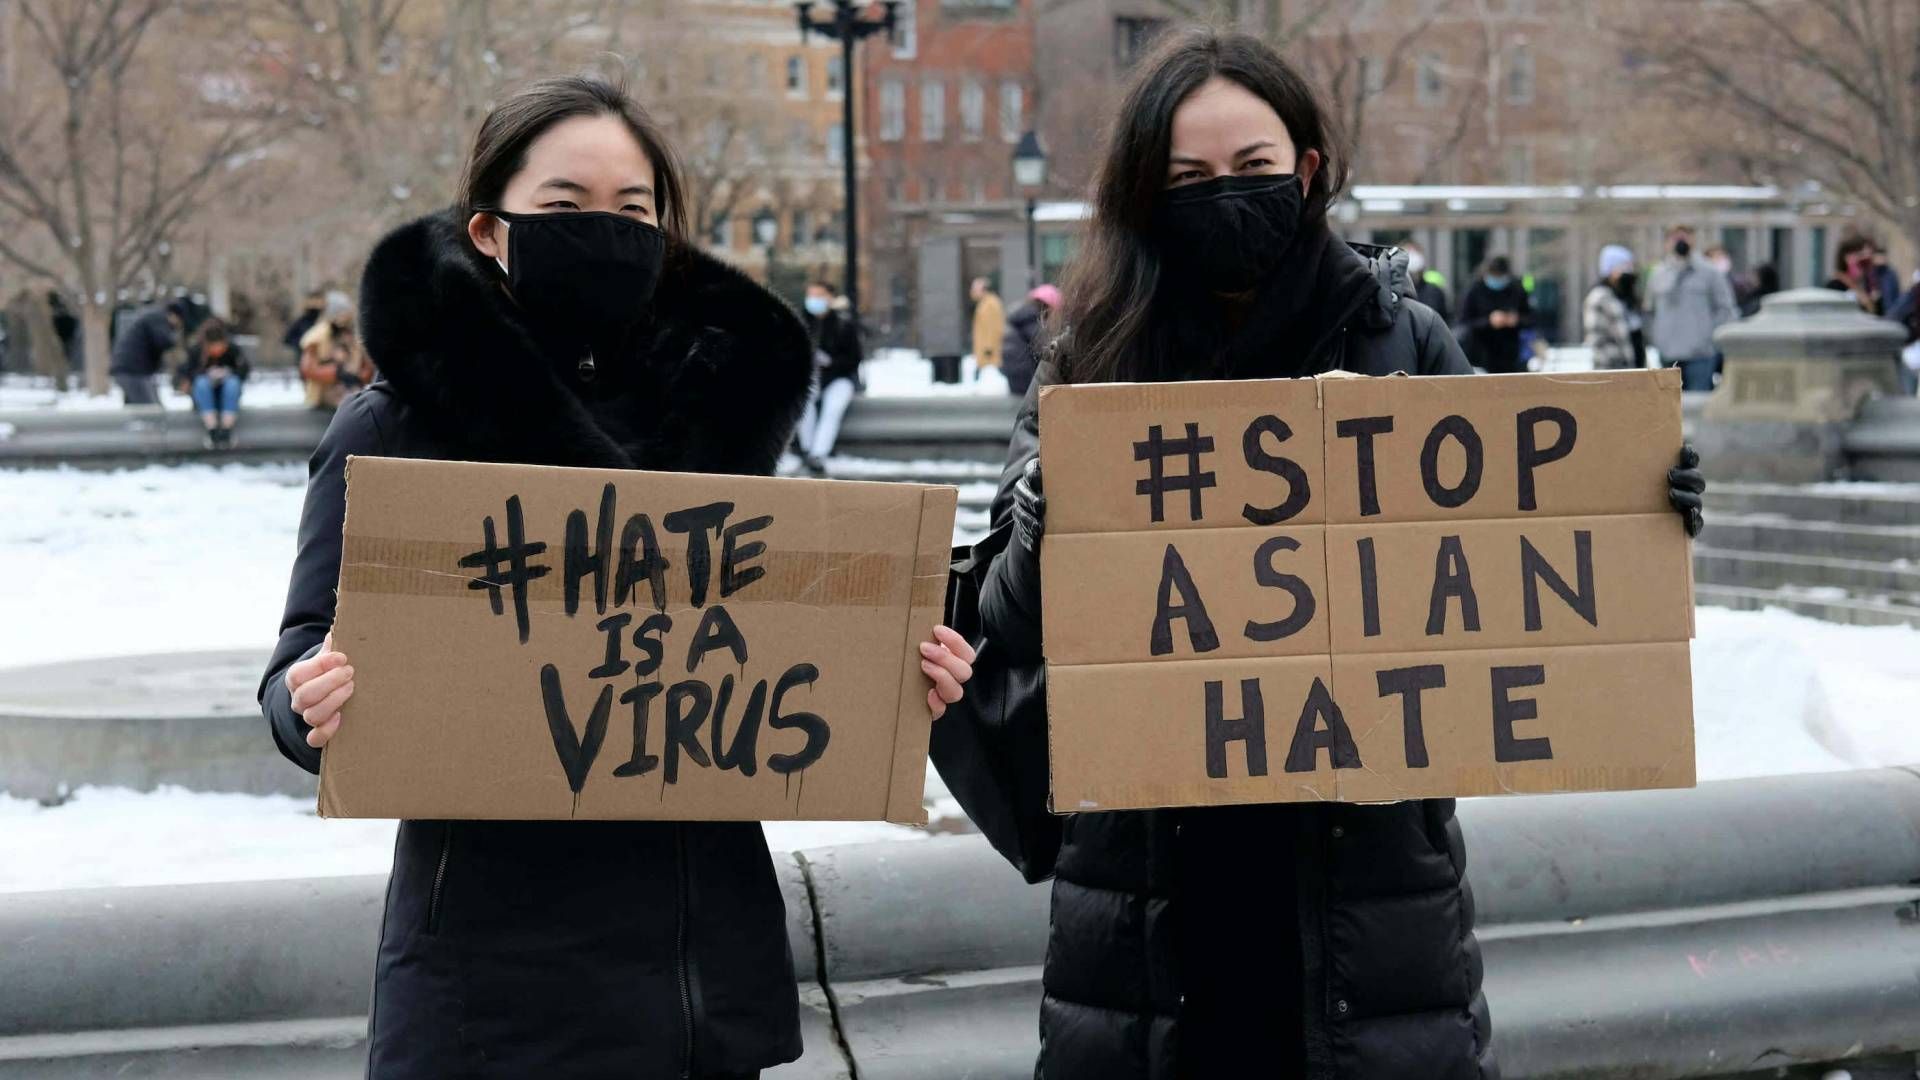 New Minnesota safety patrol aims to stop anti-Asian hate in the